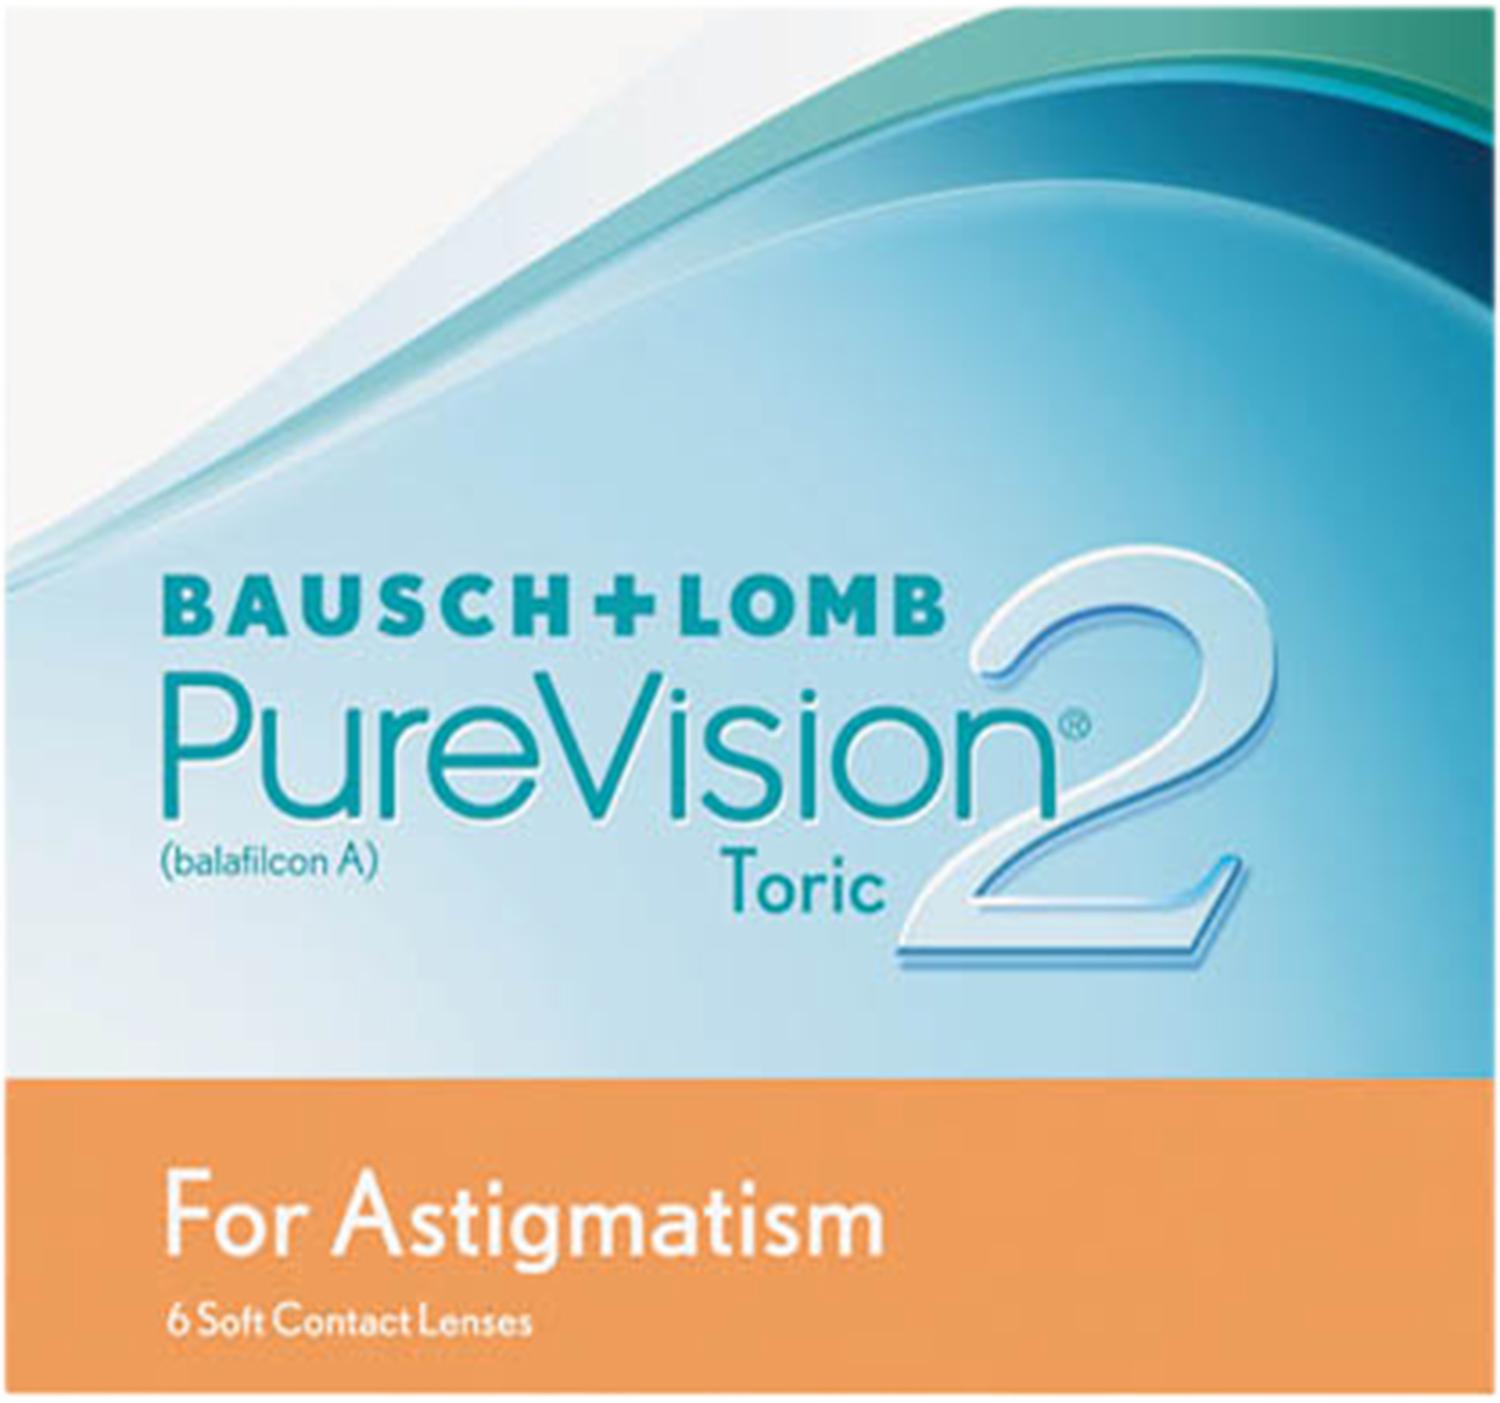 PureVision 2 for Astigmatism